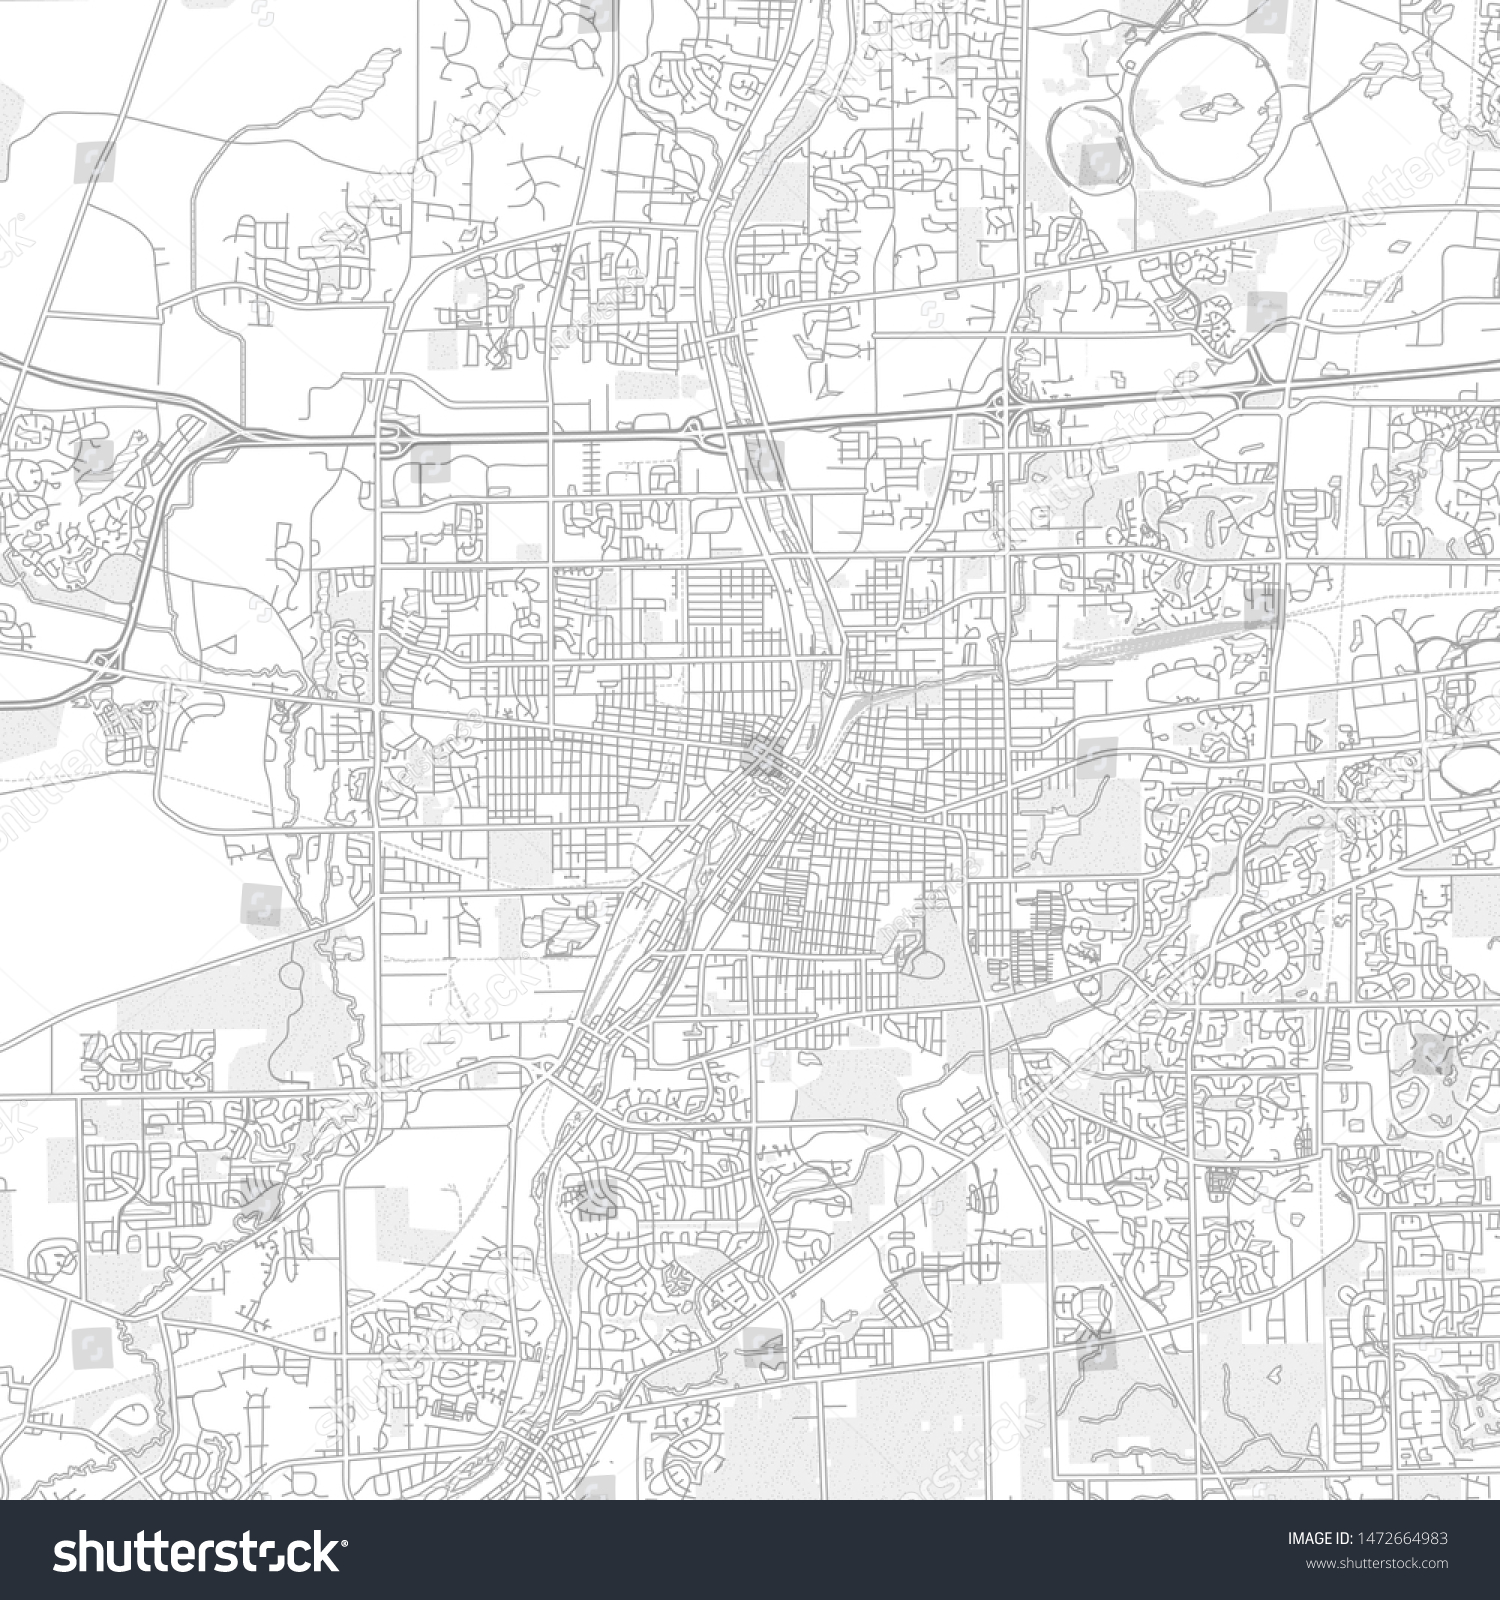 SVG of Aurora, Illinois, USA, bright outlined vector map with bigger and minor roads and steets created for infographic backgrounds. svg